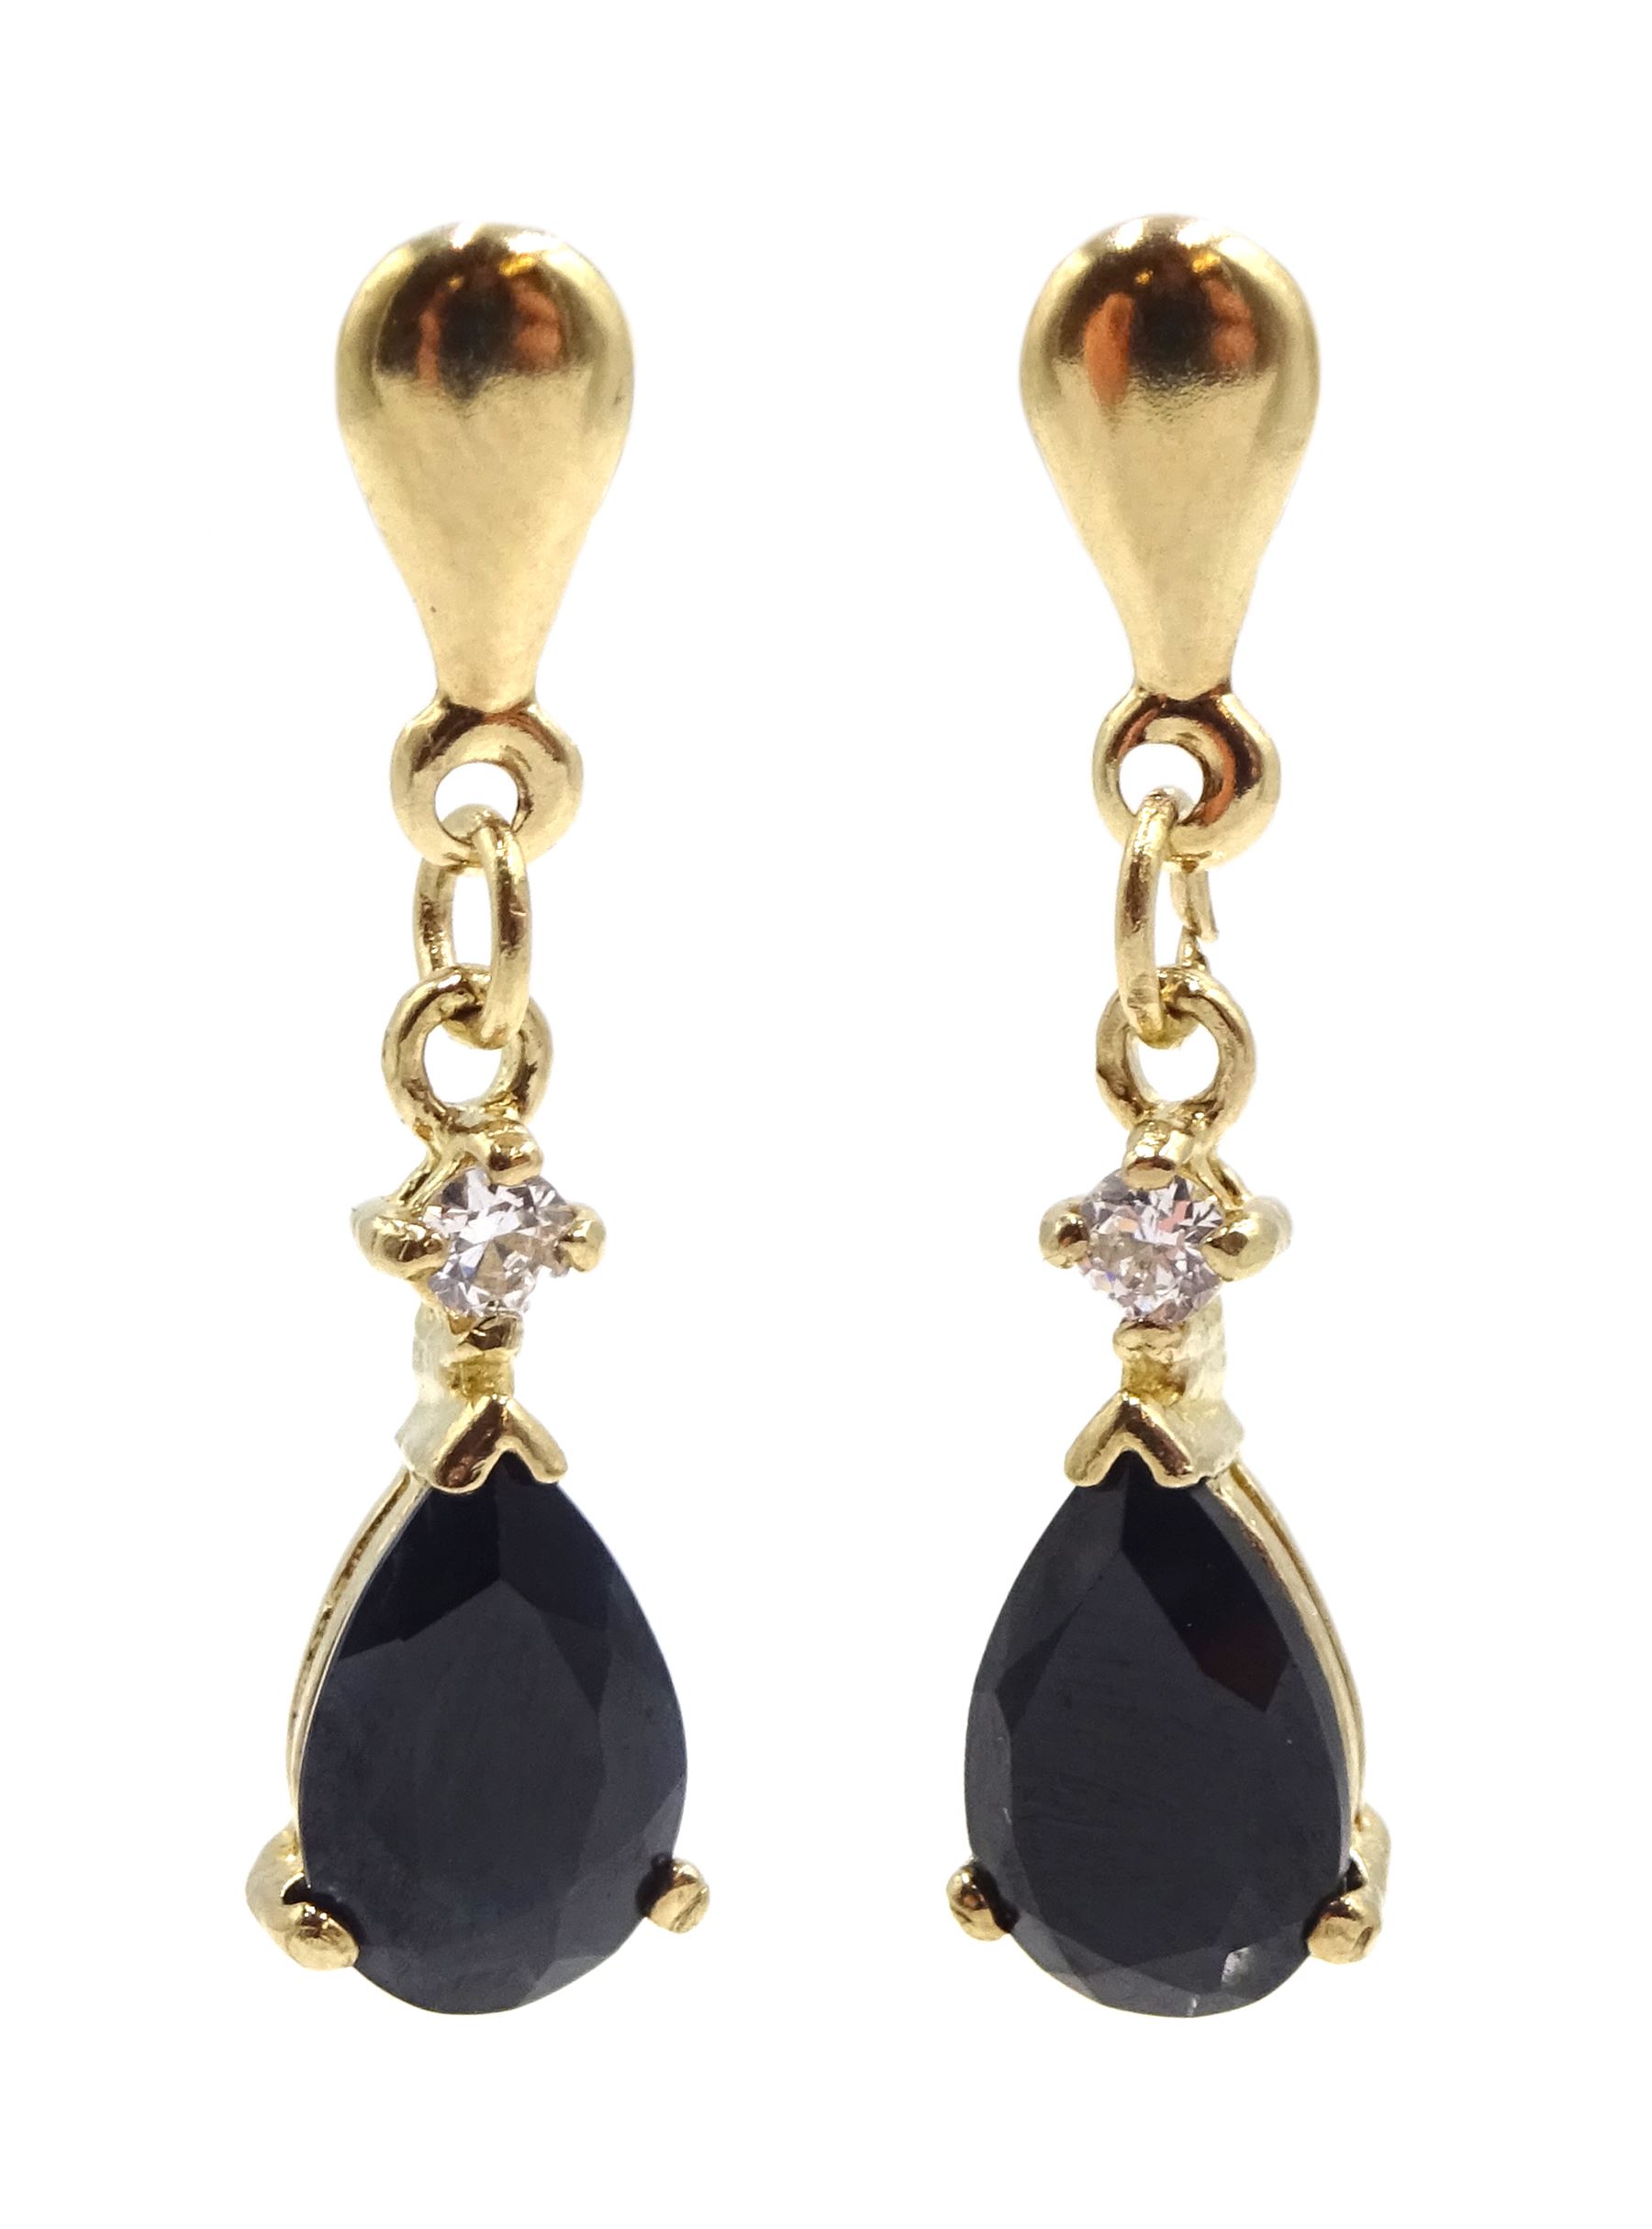 Pair of 9ct gold sapphire and and cubic zirconia earrings